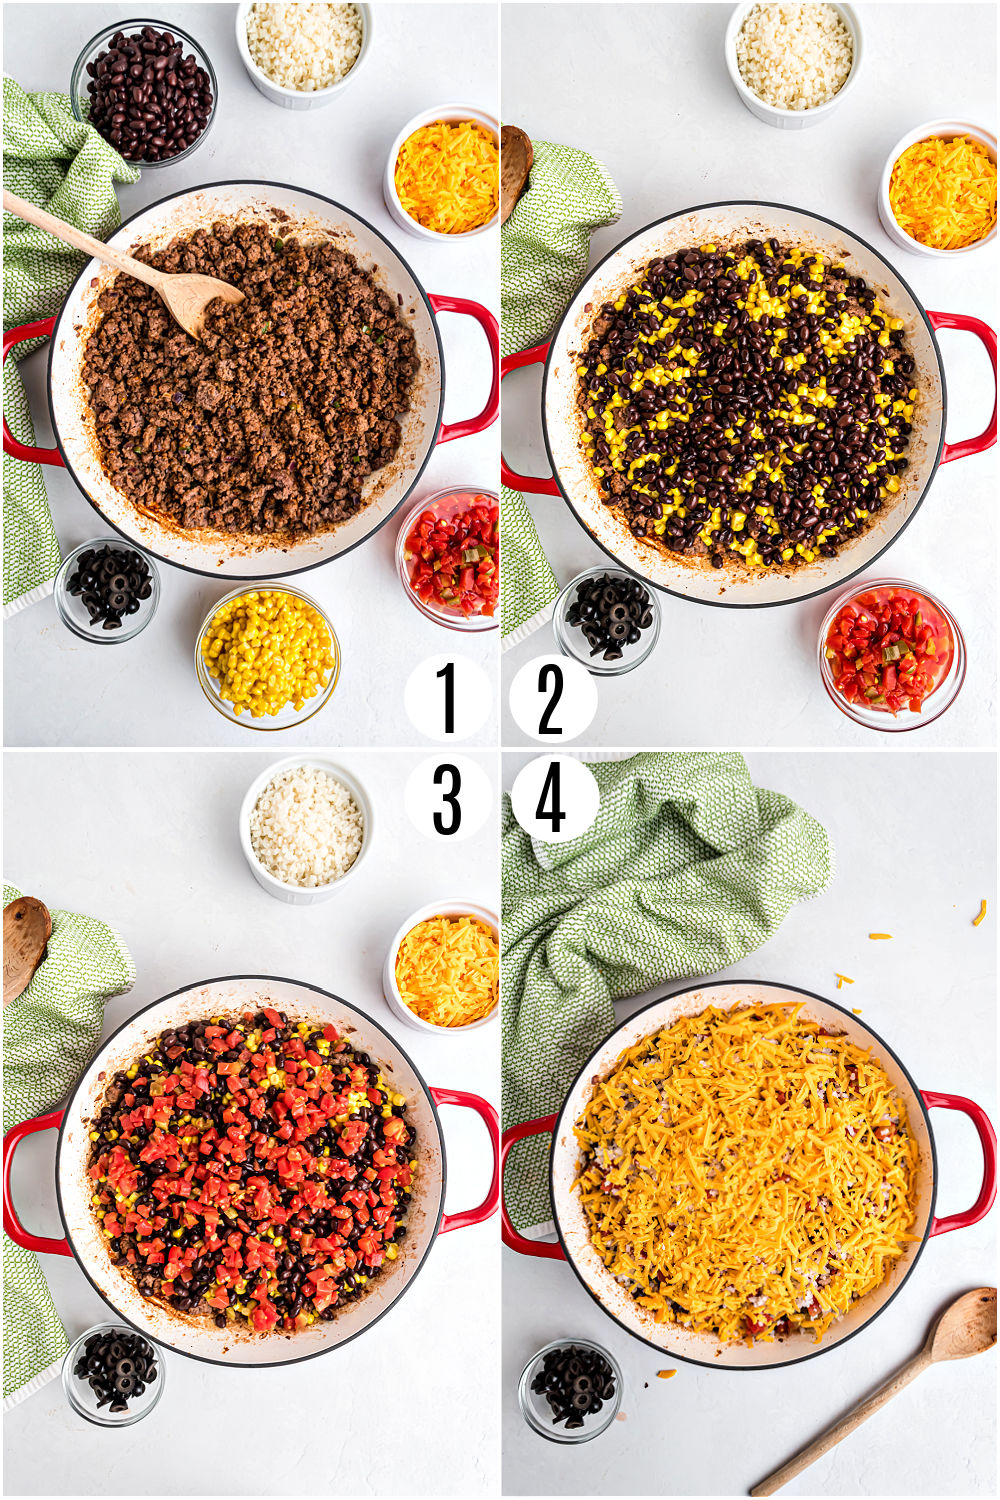 Step by step photos showing how to make low carb beef taco casserole in a skillet.